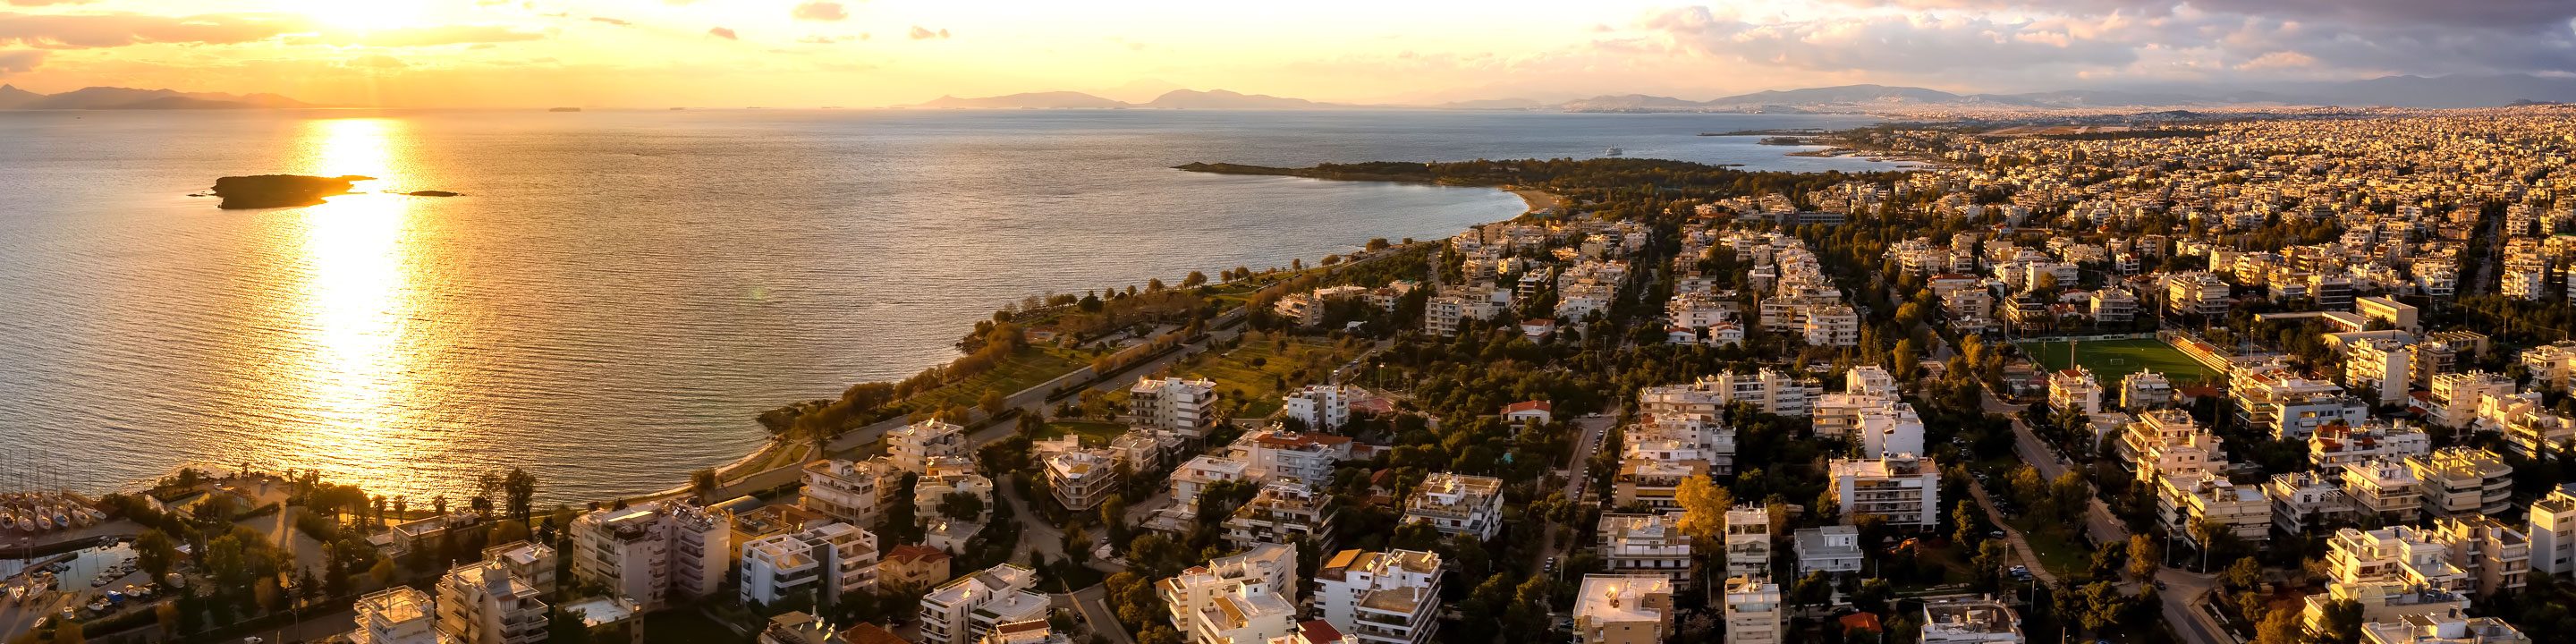 Southern suburb of Glyfada in Athens